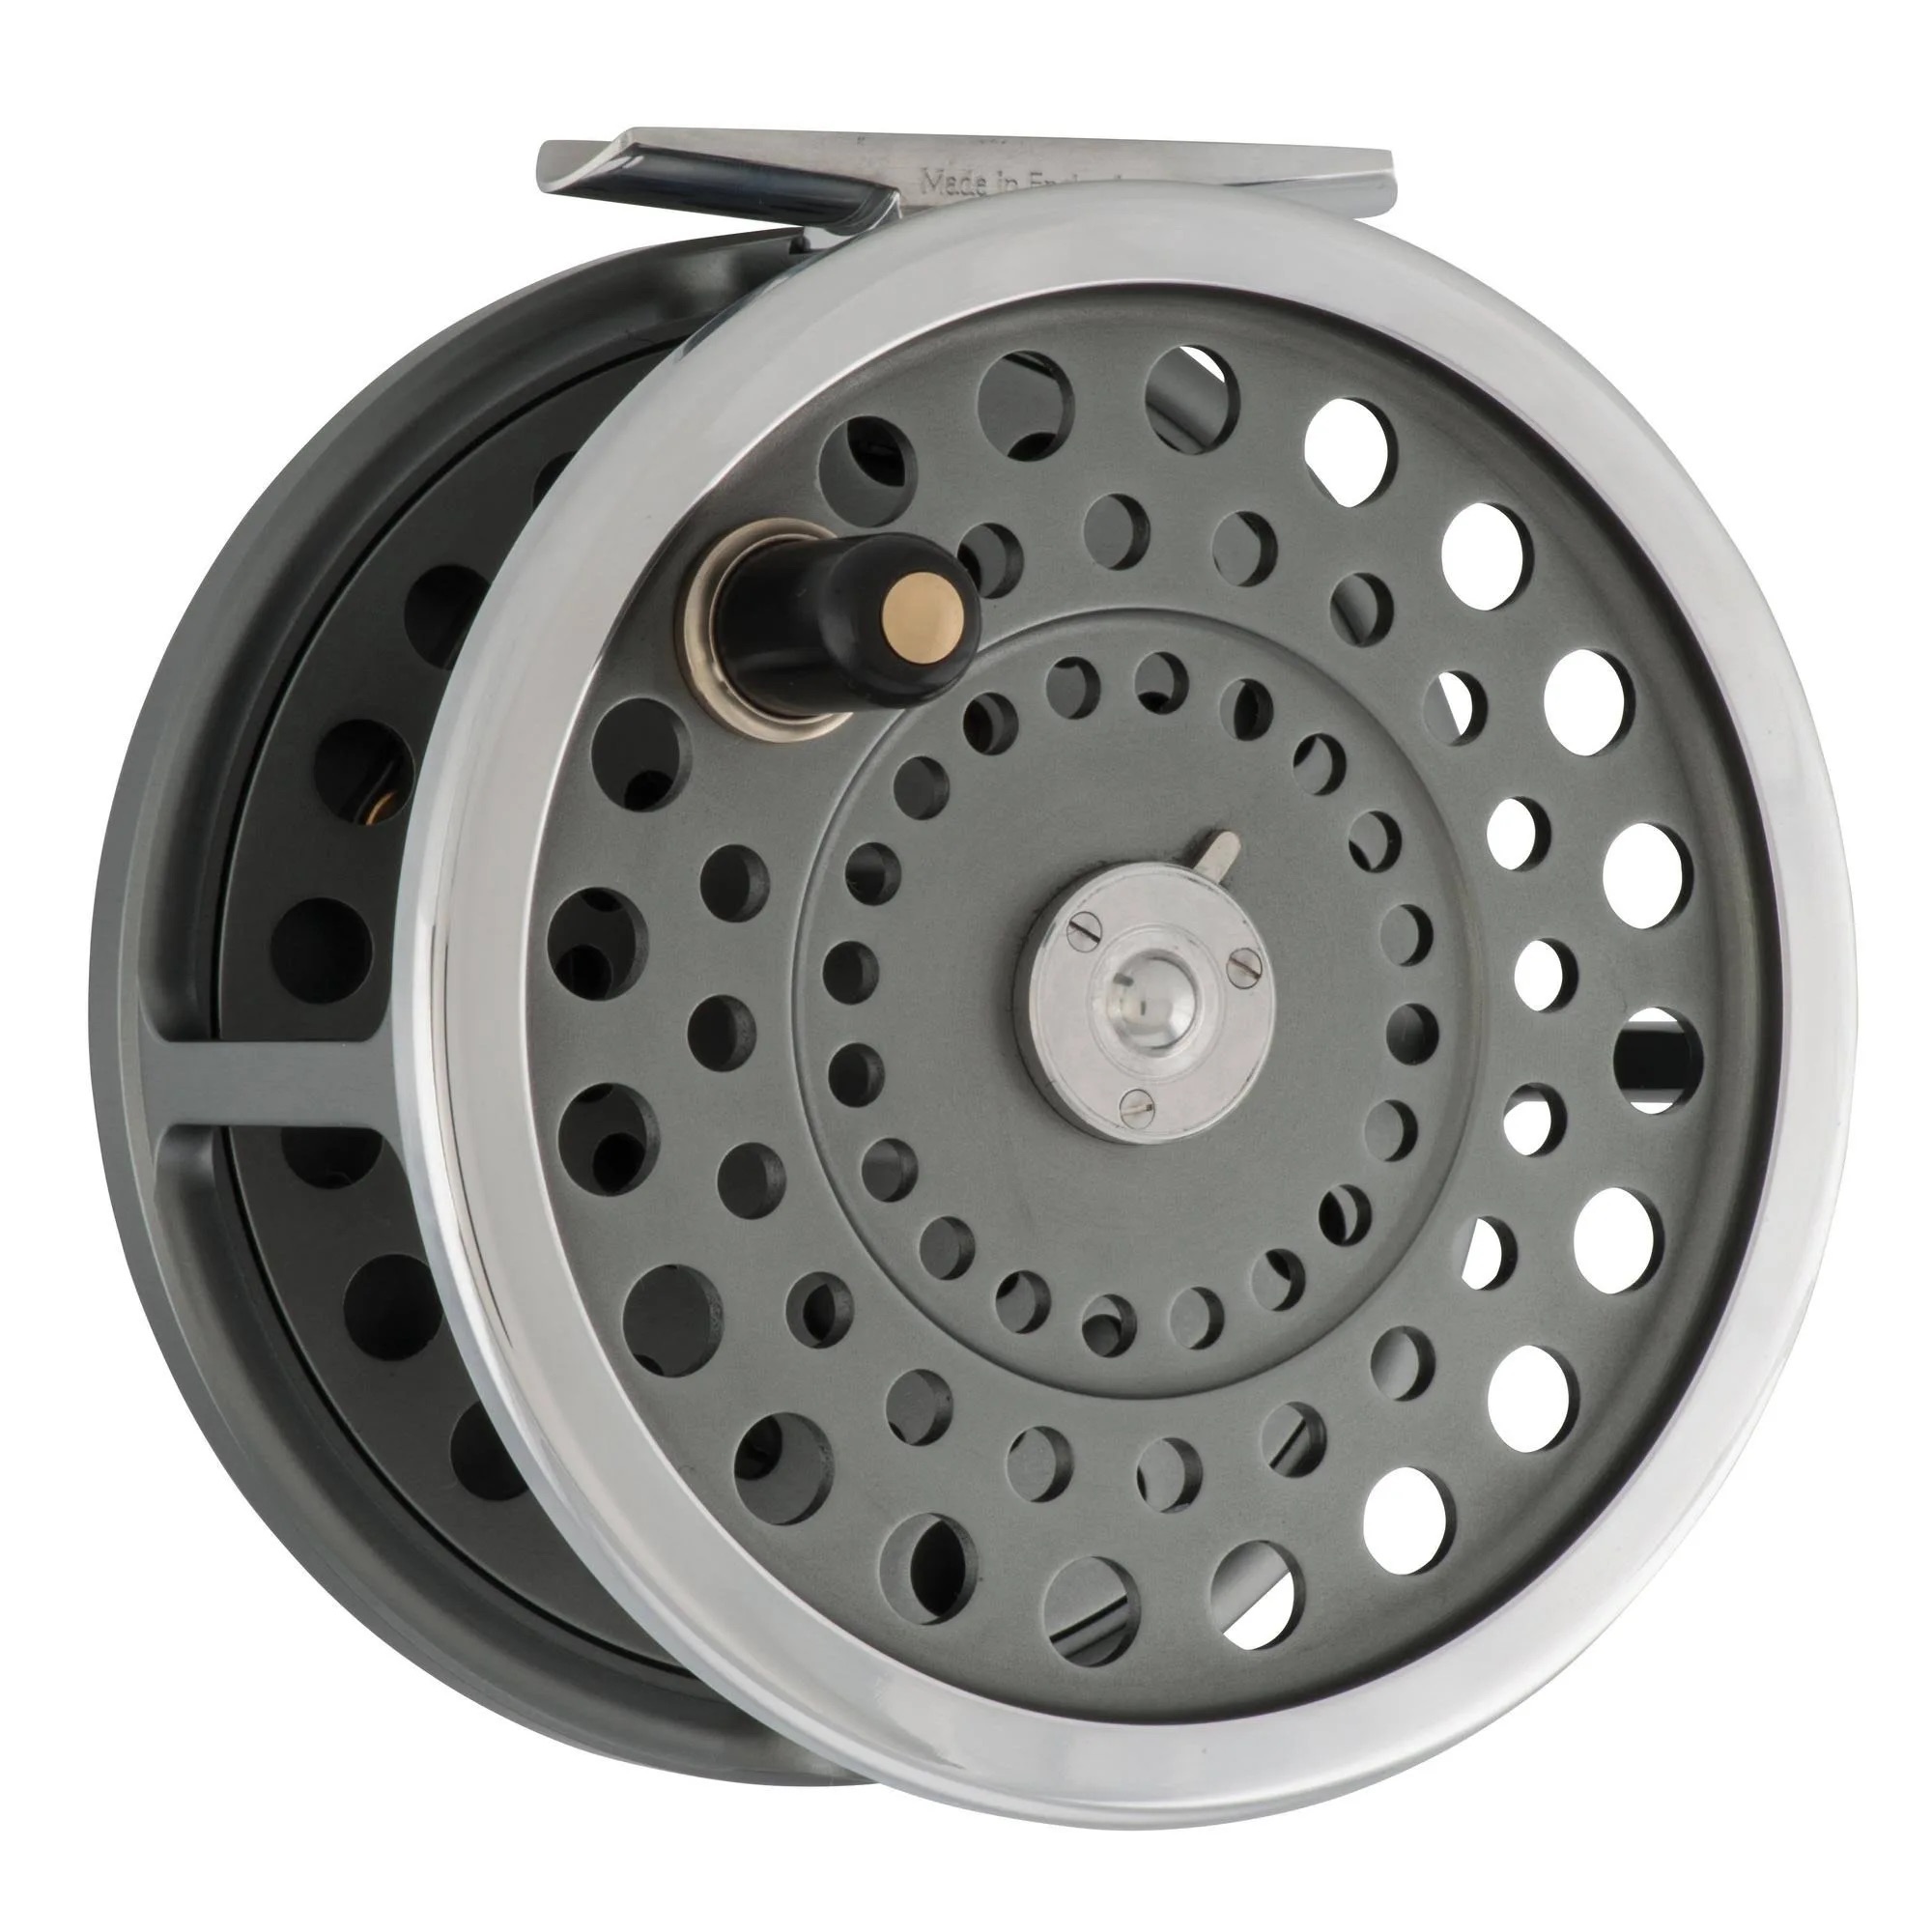 Hardy Marquis Salmon 1 Fly Reel